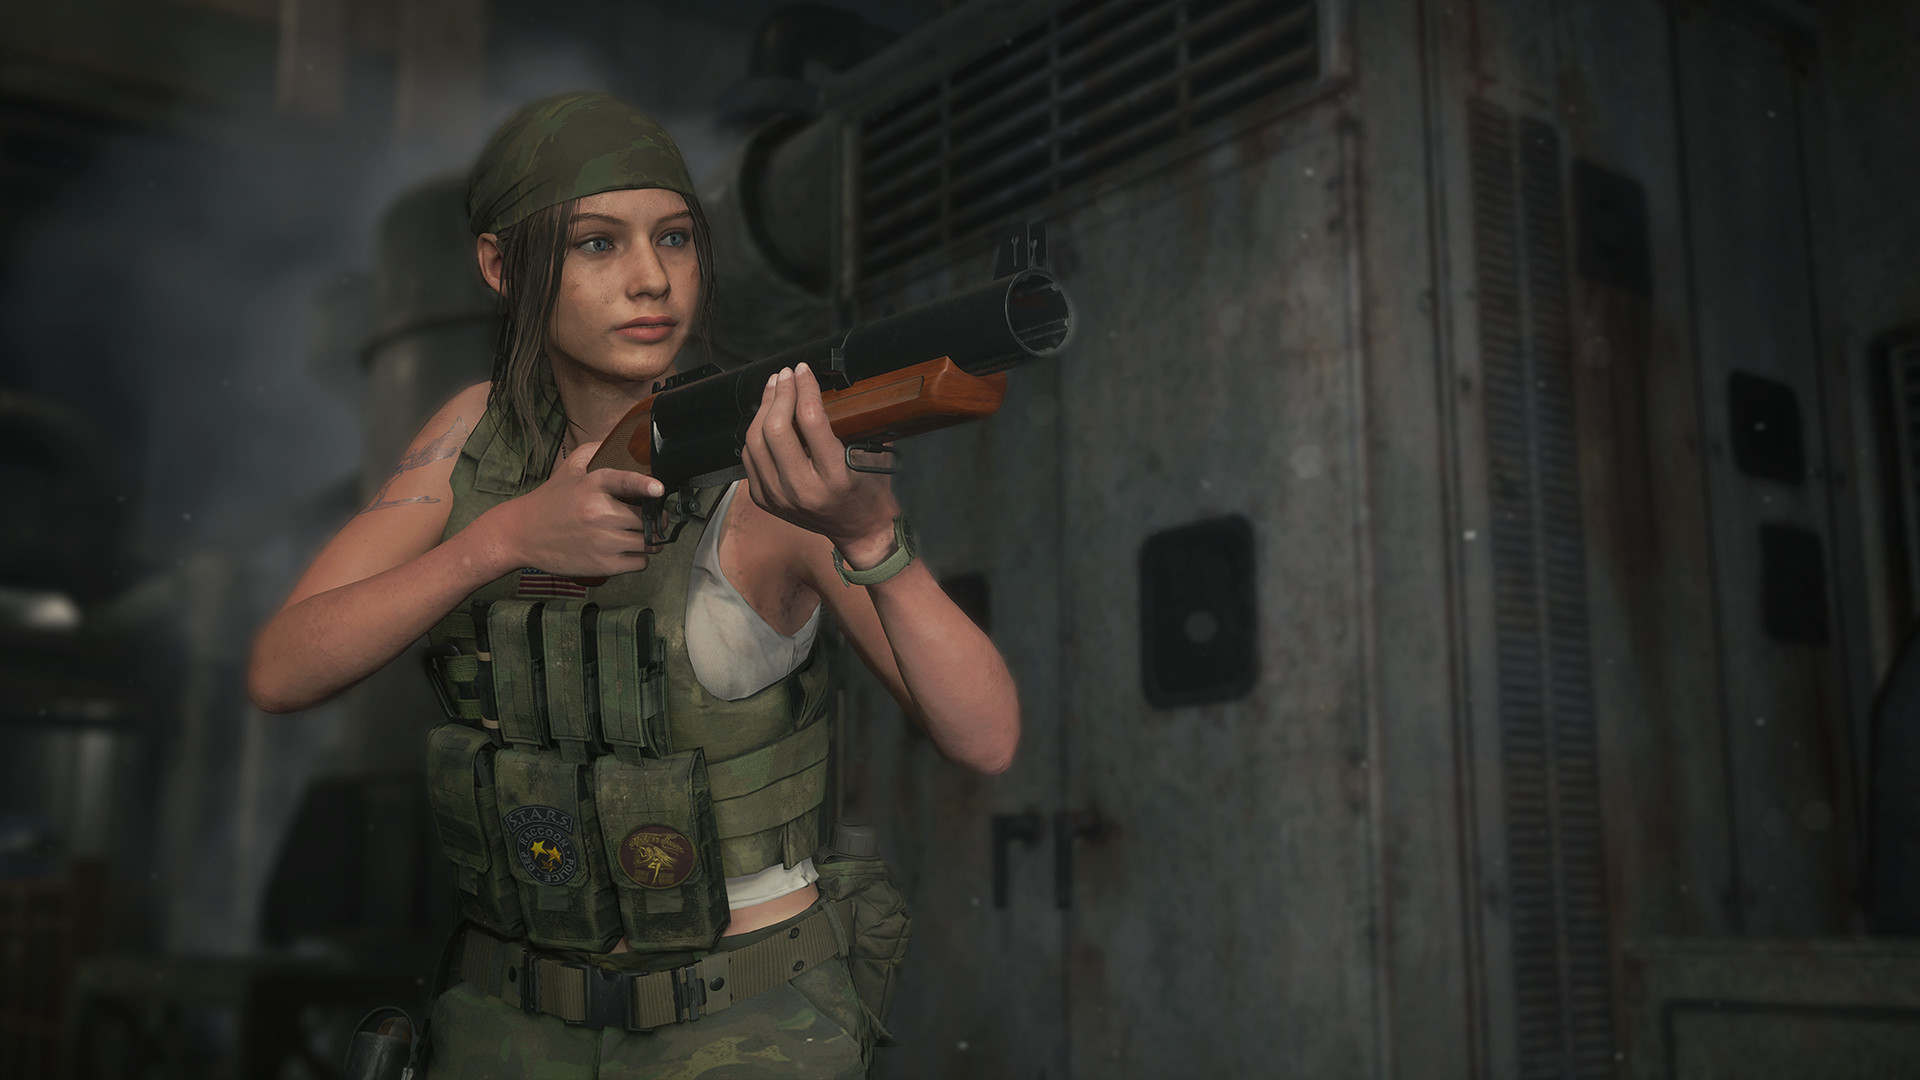 Resident Evil 2' Remake Video Shows Off Claire Redfield's Military